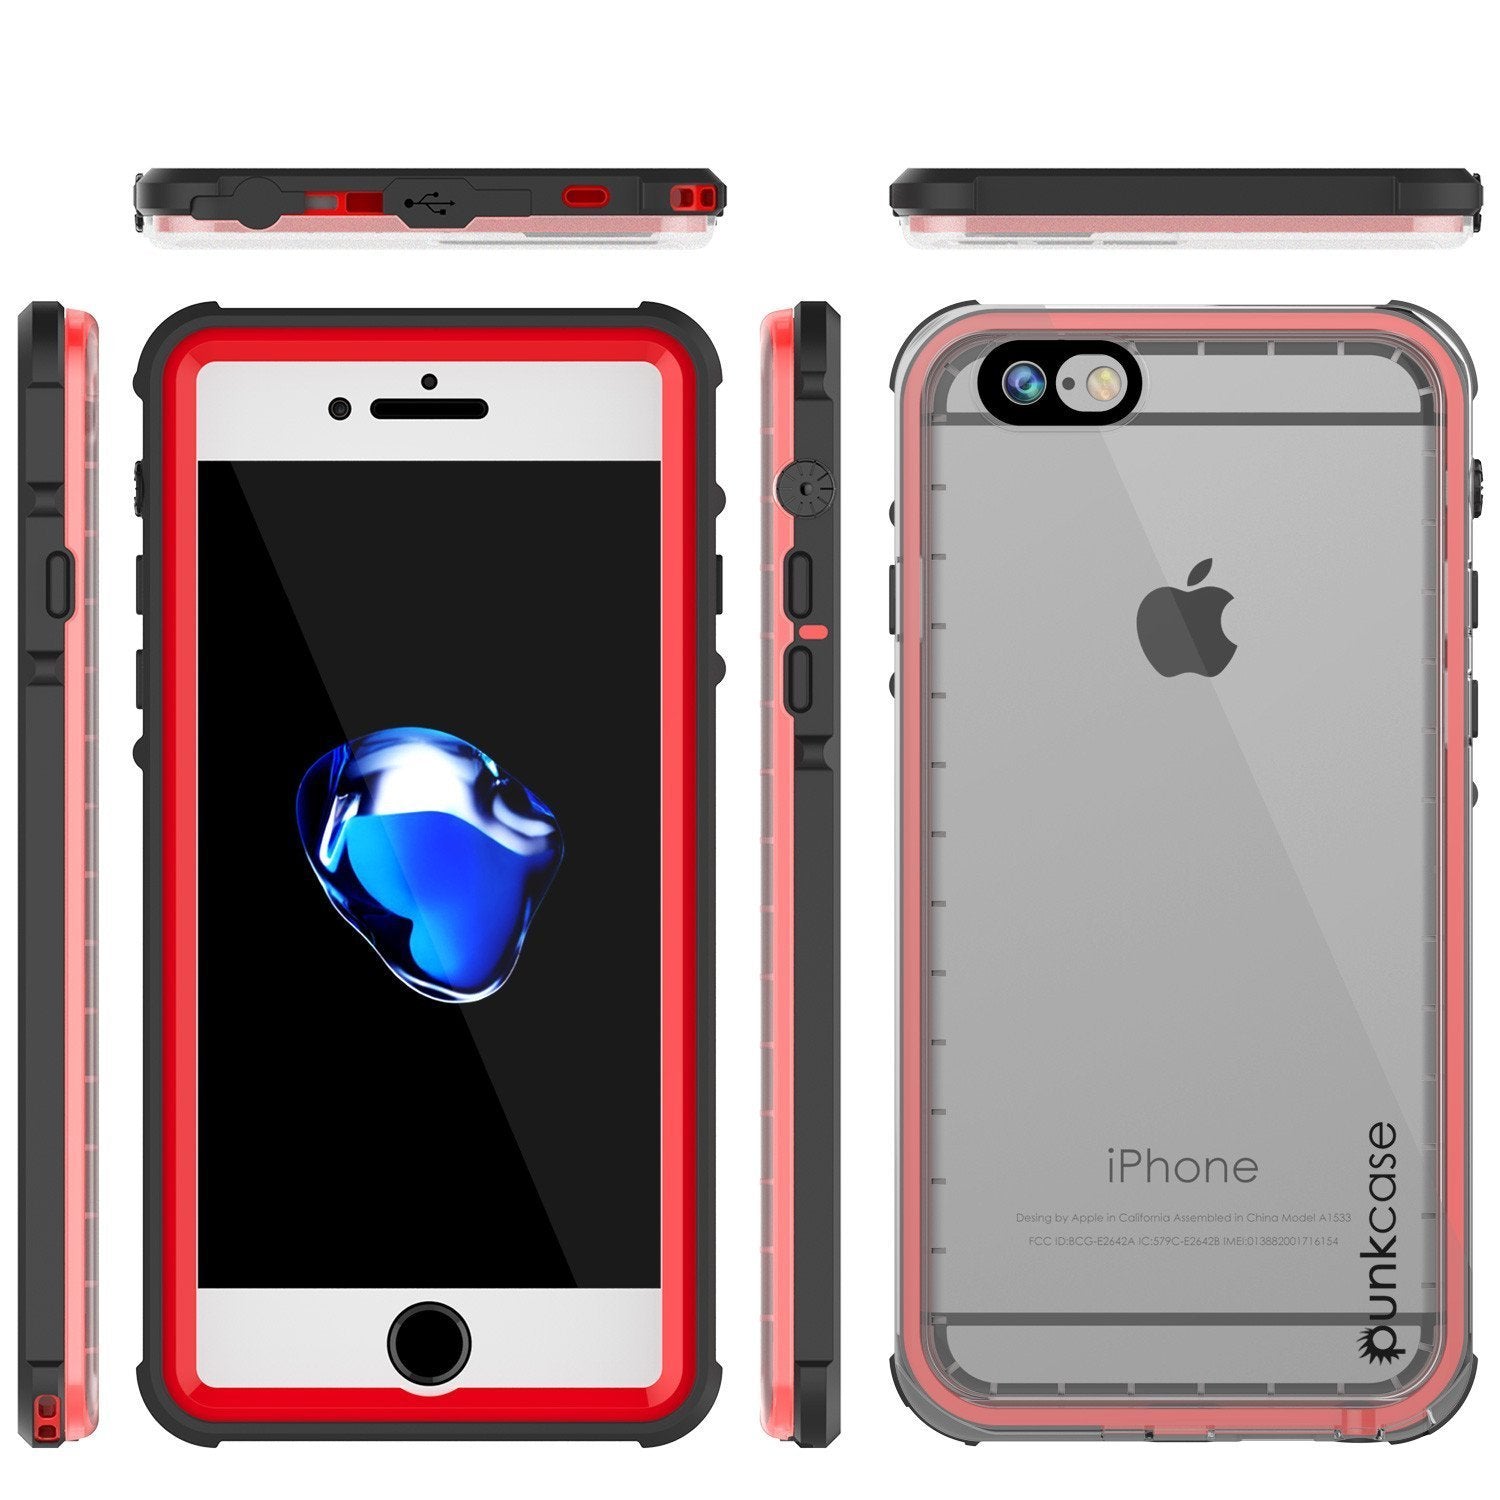 Apple iPhone SE (4.7") Waterproof Case, PUNKcase CRYSTAL Red W/ Attached Screen Protector  | Warranty